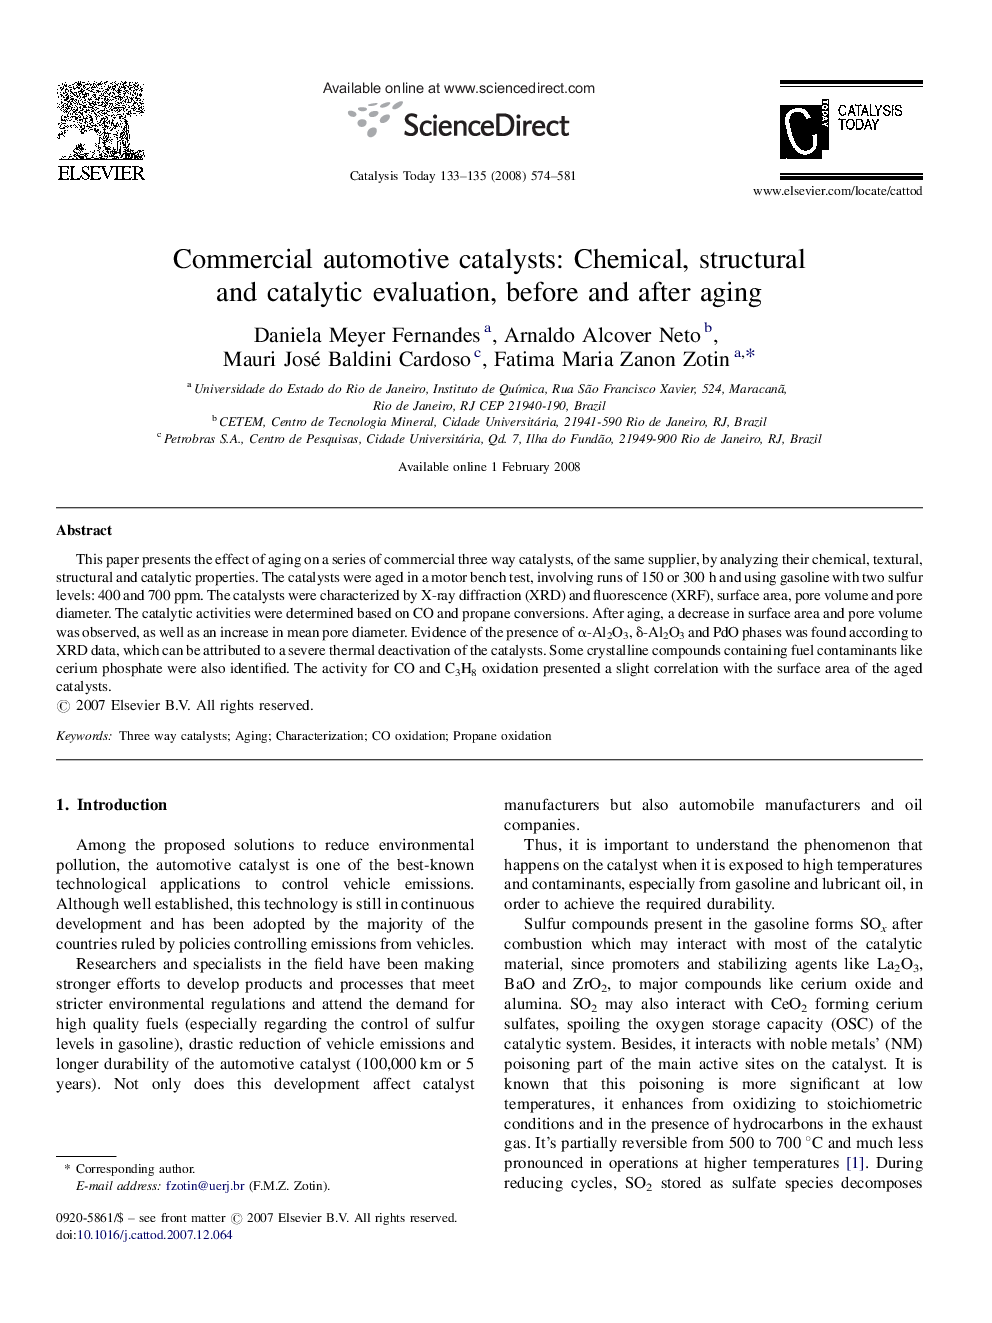 Commercial automotive catalysts: Chemical, structural and catalytic evaluation, before and after aging